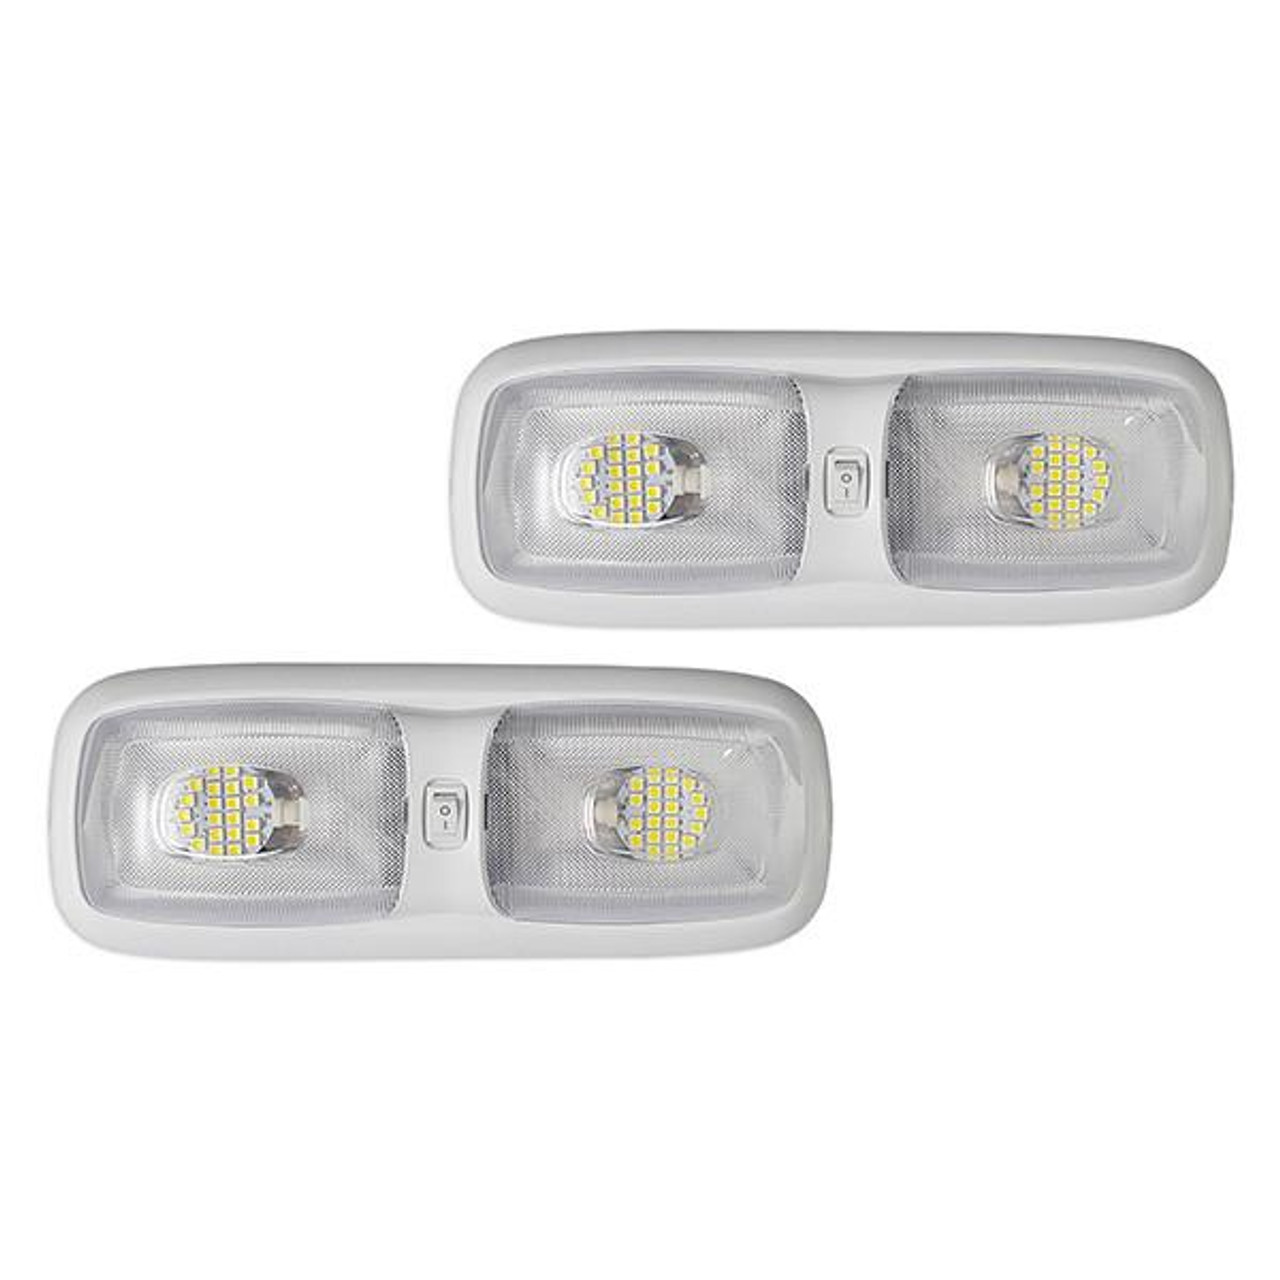 RV LED 4 1/2 Surface Mount Dome Light Battery Powered - RecPro